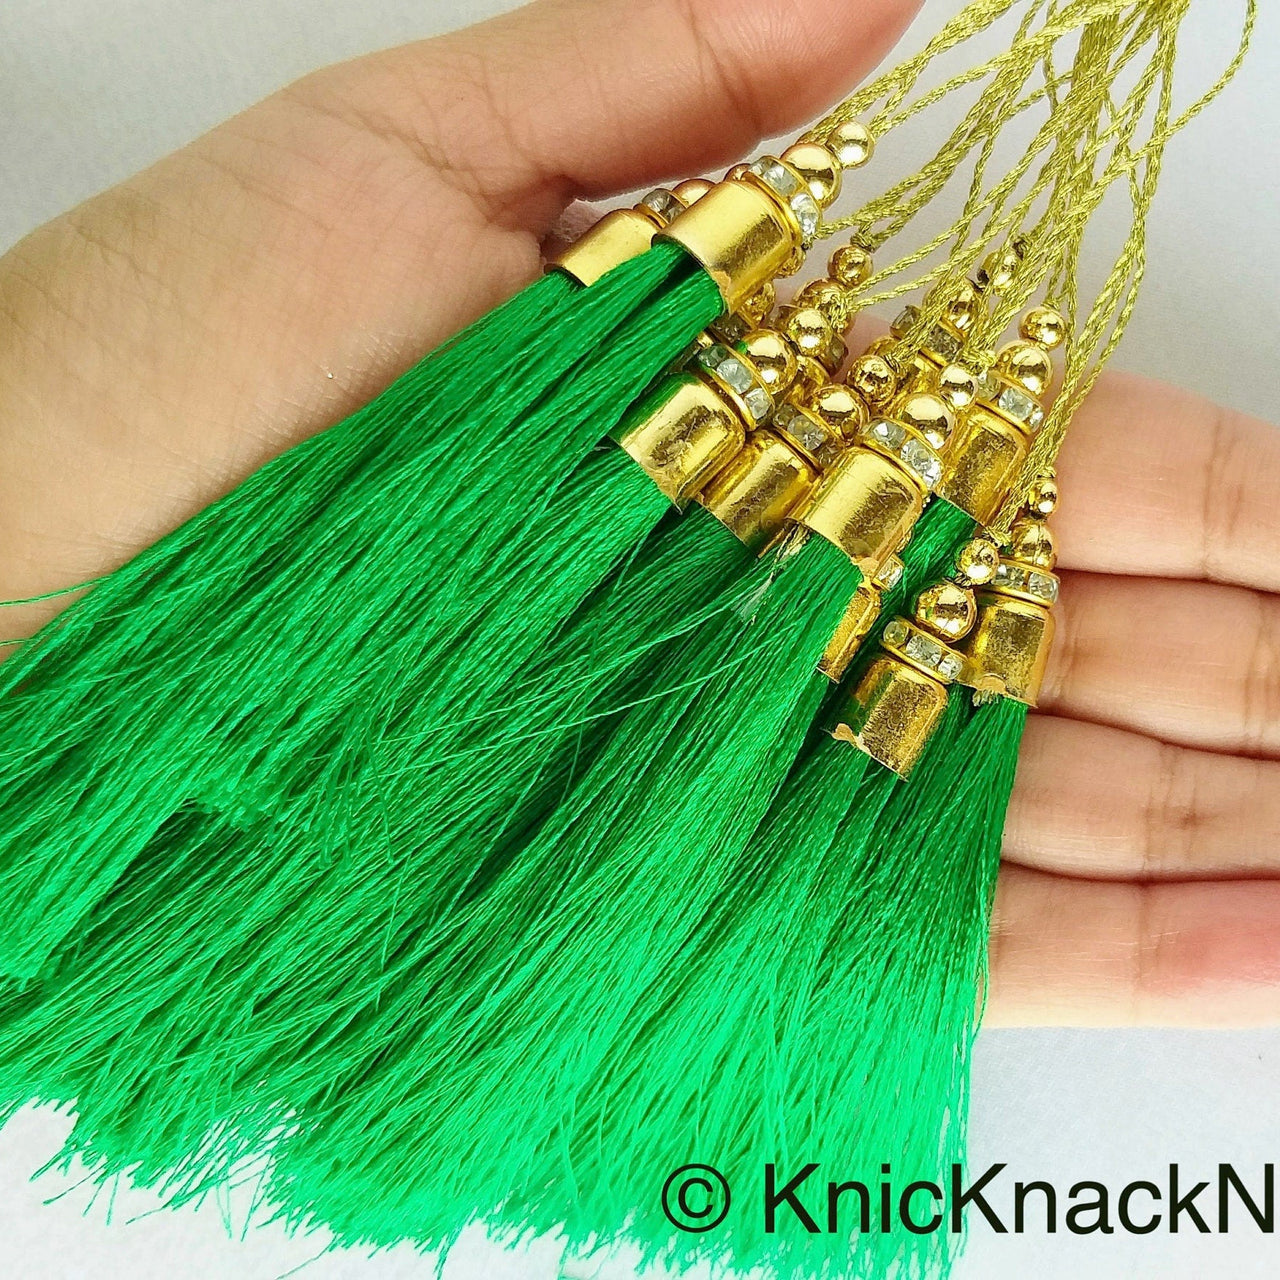 Crusoe, Dark Green Tassels With Gold Cap And Beads, Tassel Charms